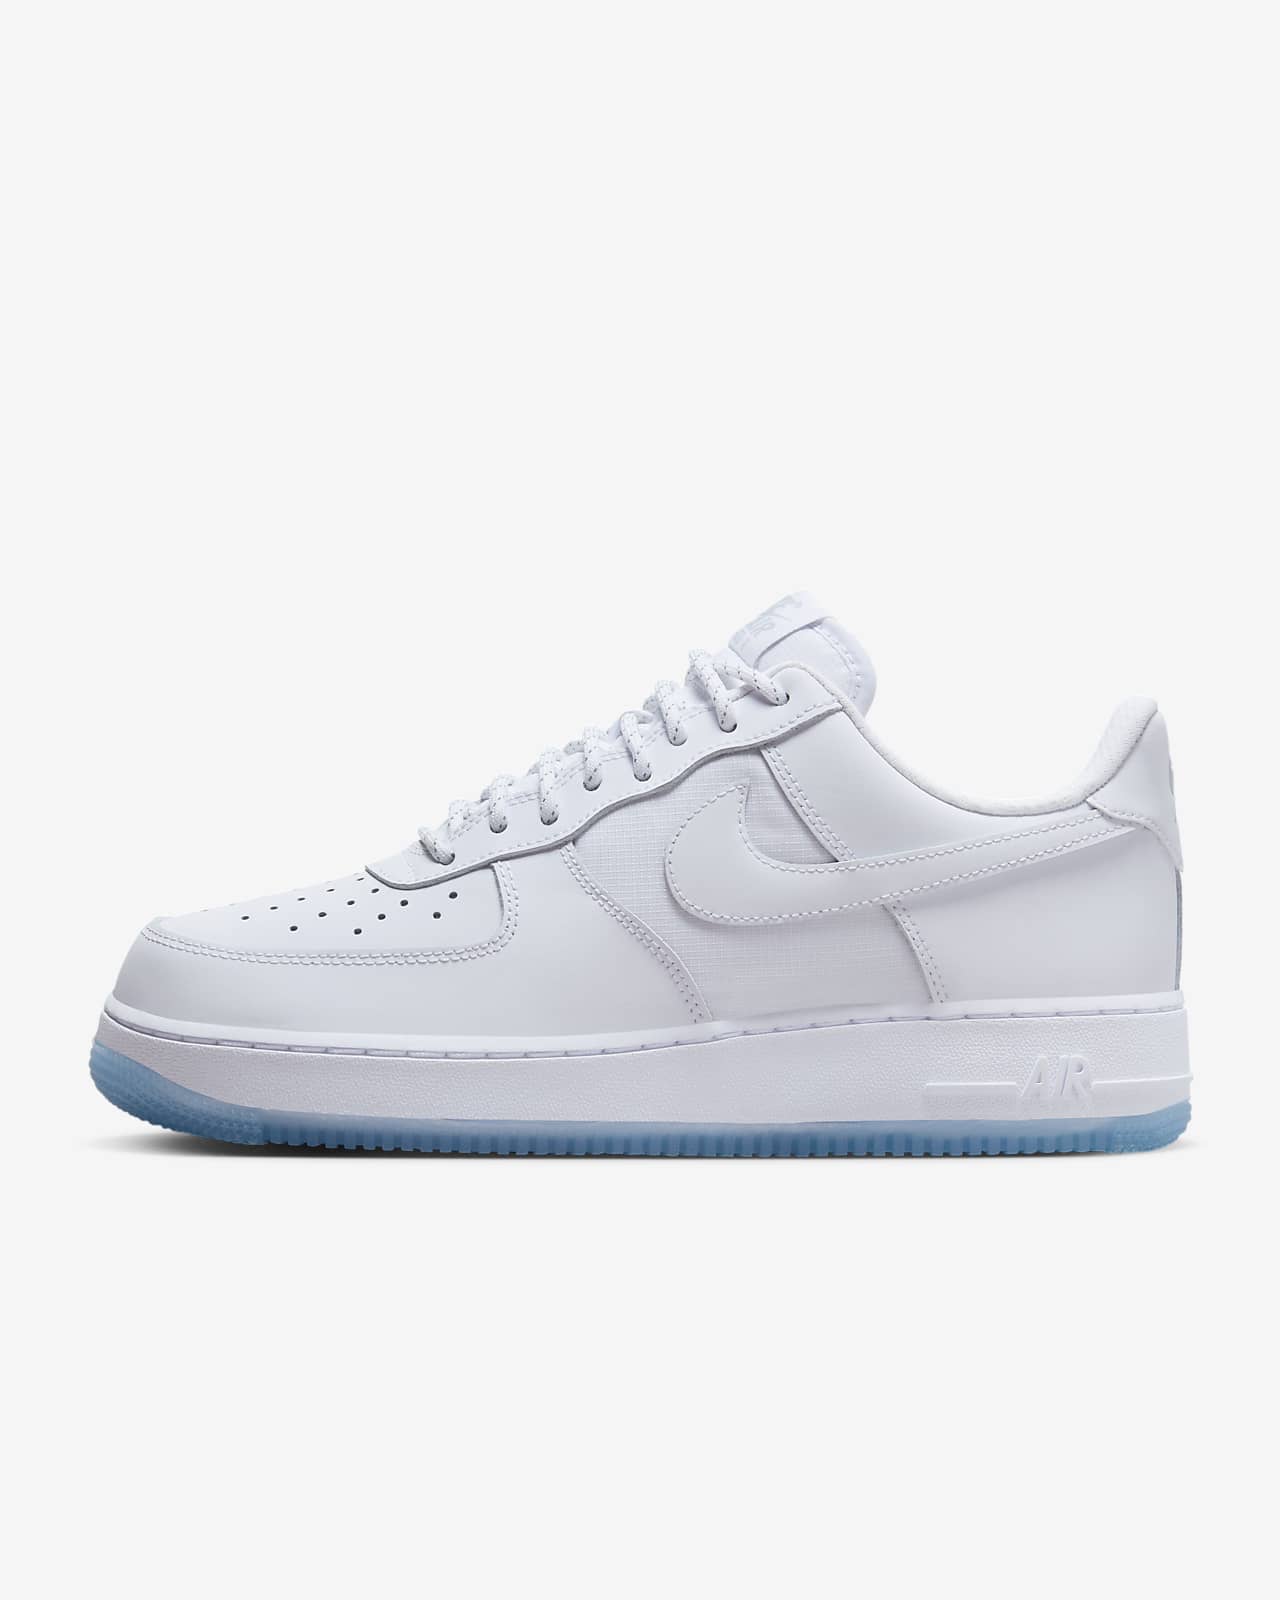 Chaussures Nike Air Force 1 '07 pour Homme